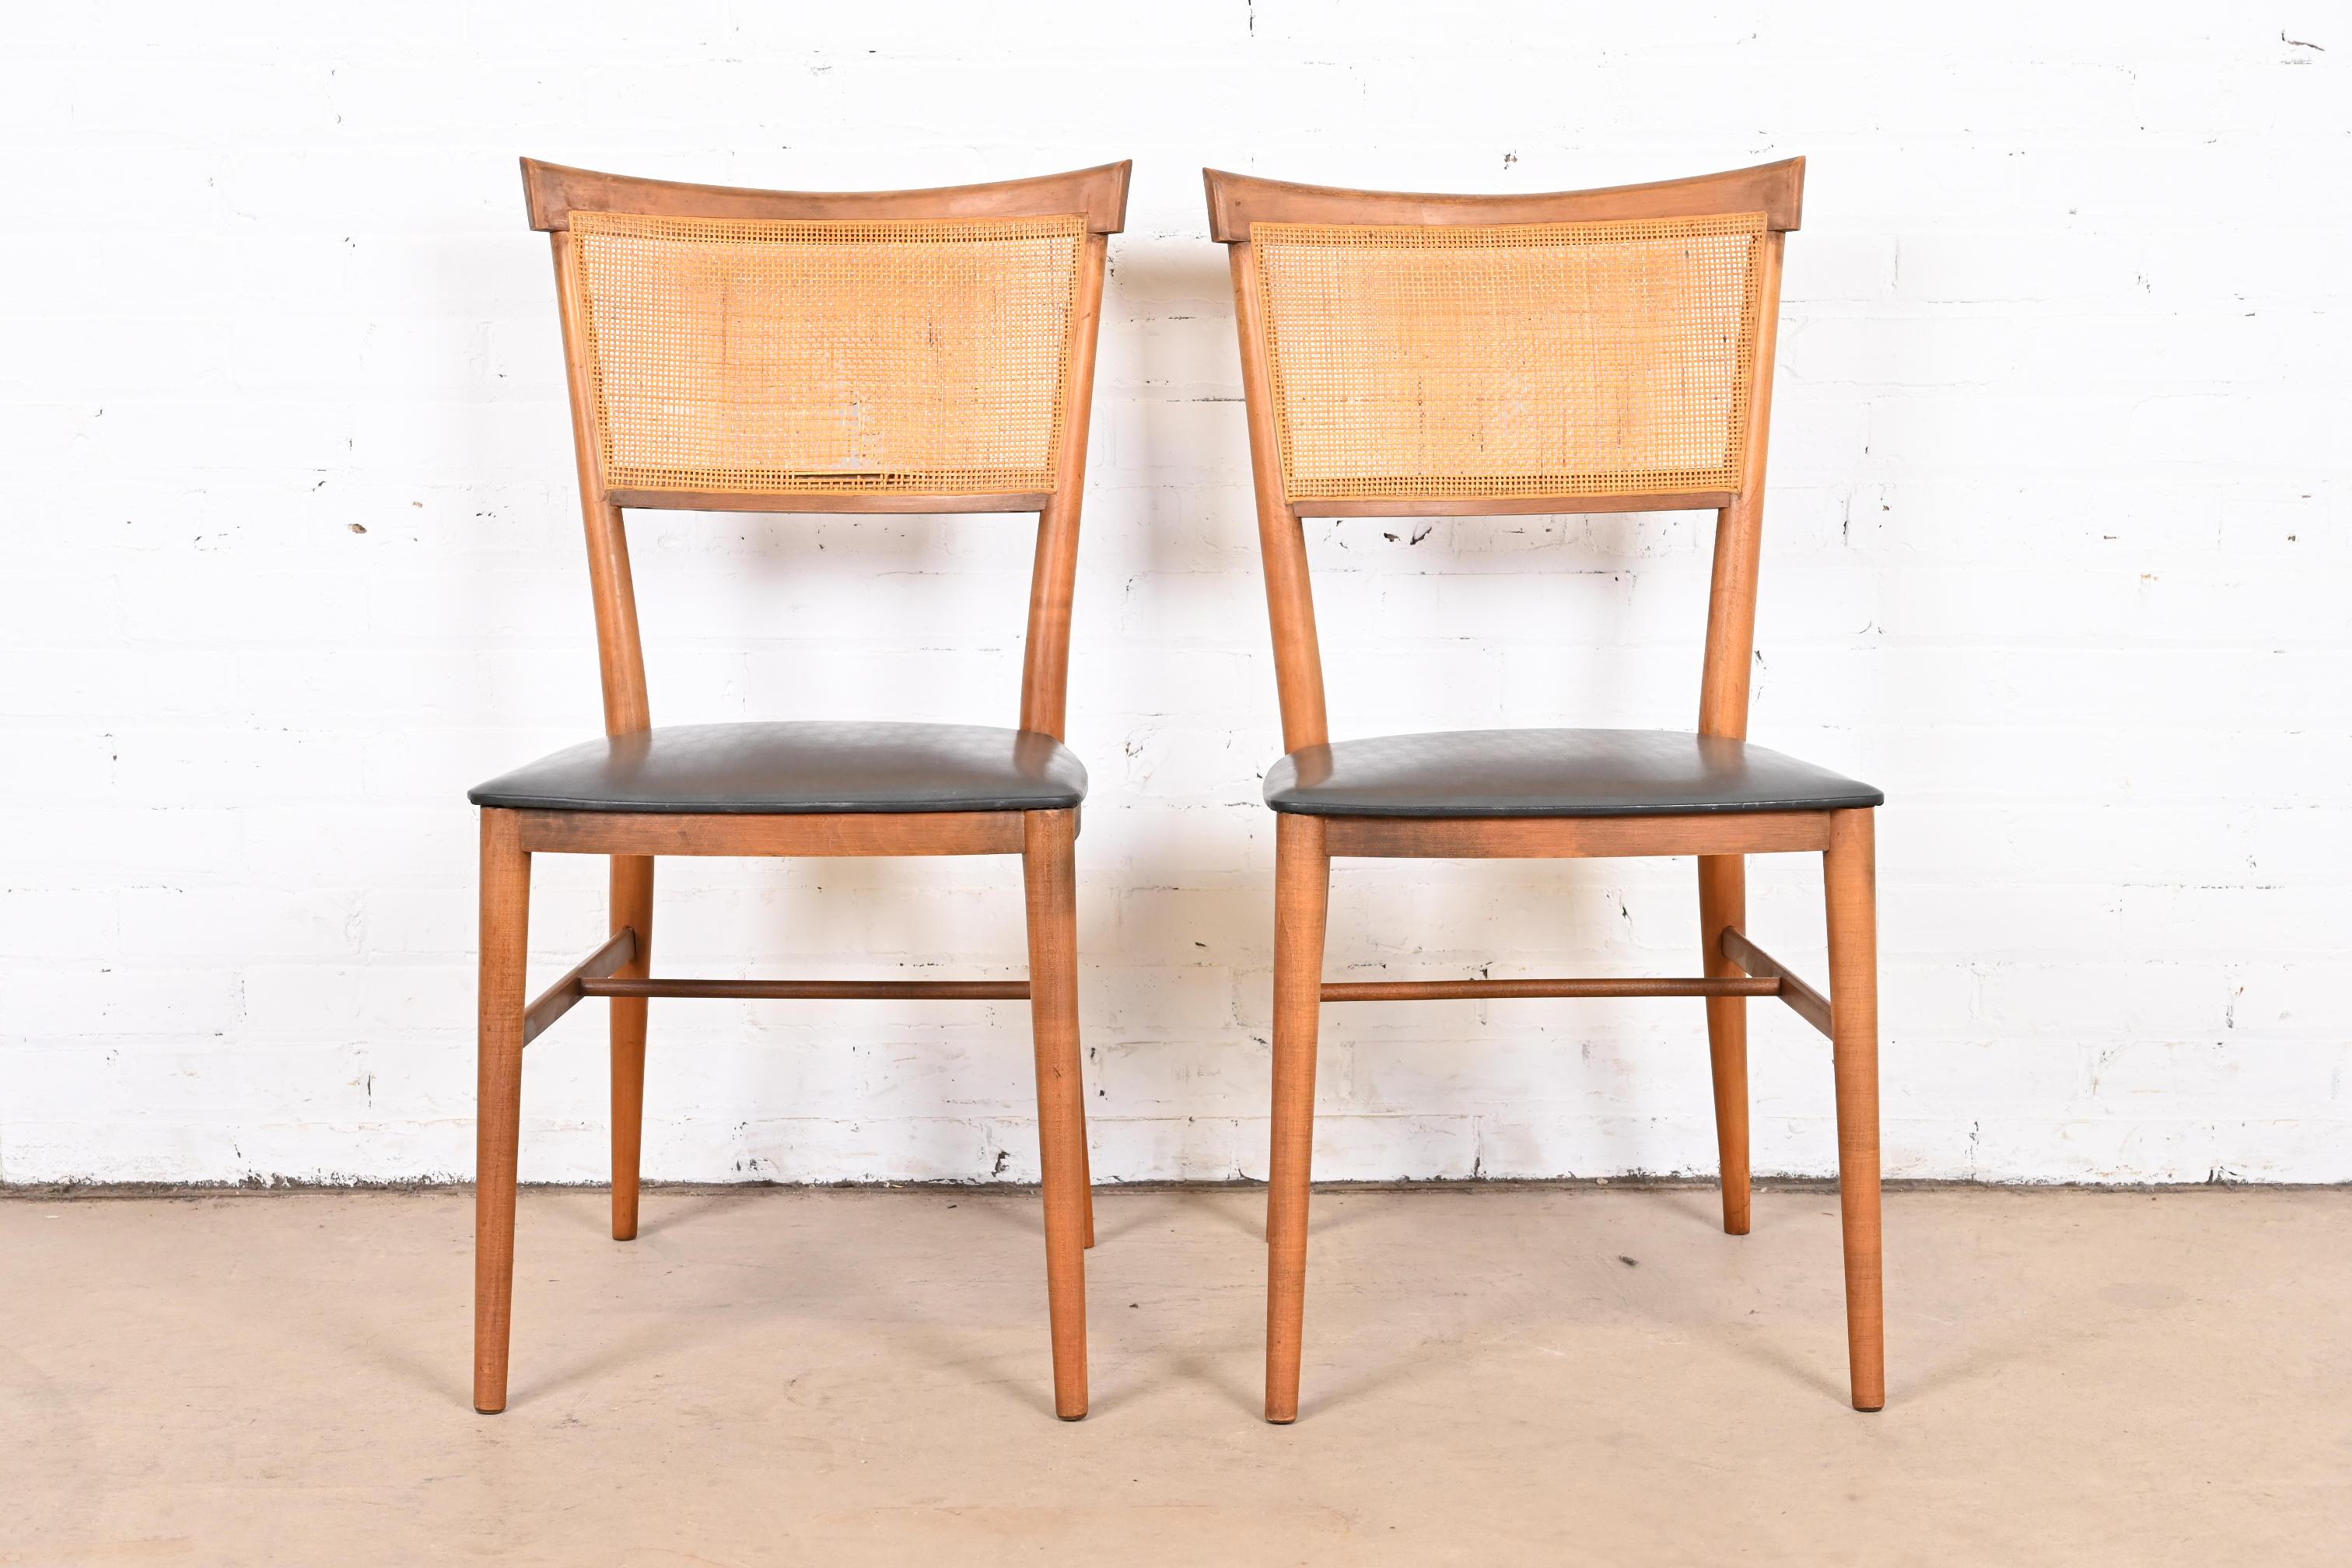 American Paul McCobb Planner Group Mid-Century Modern Dining Chairs or Side Chairs, Pair